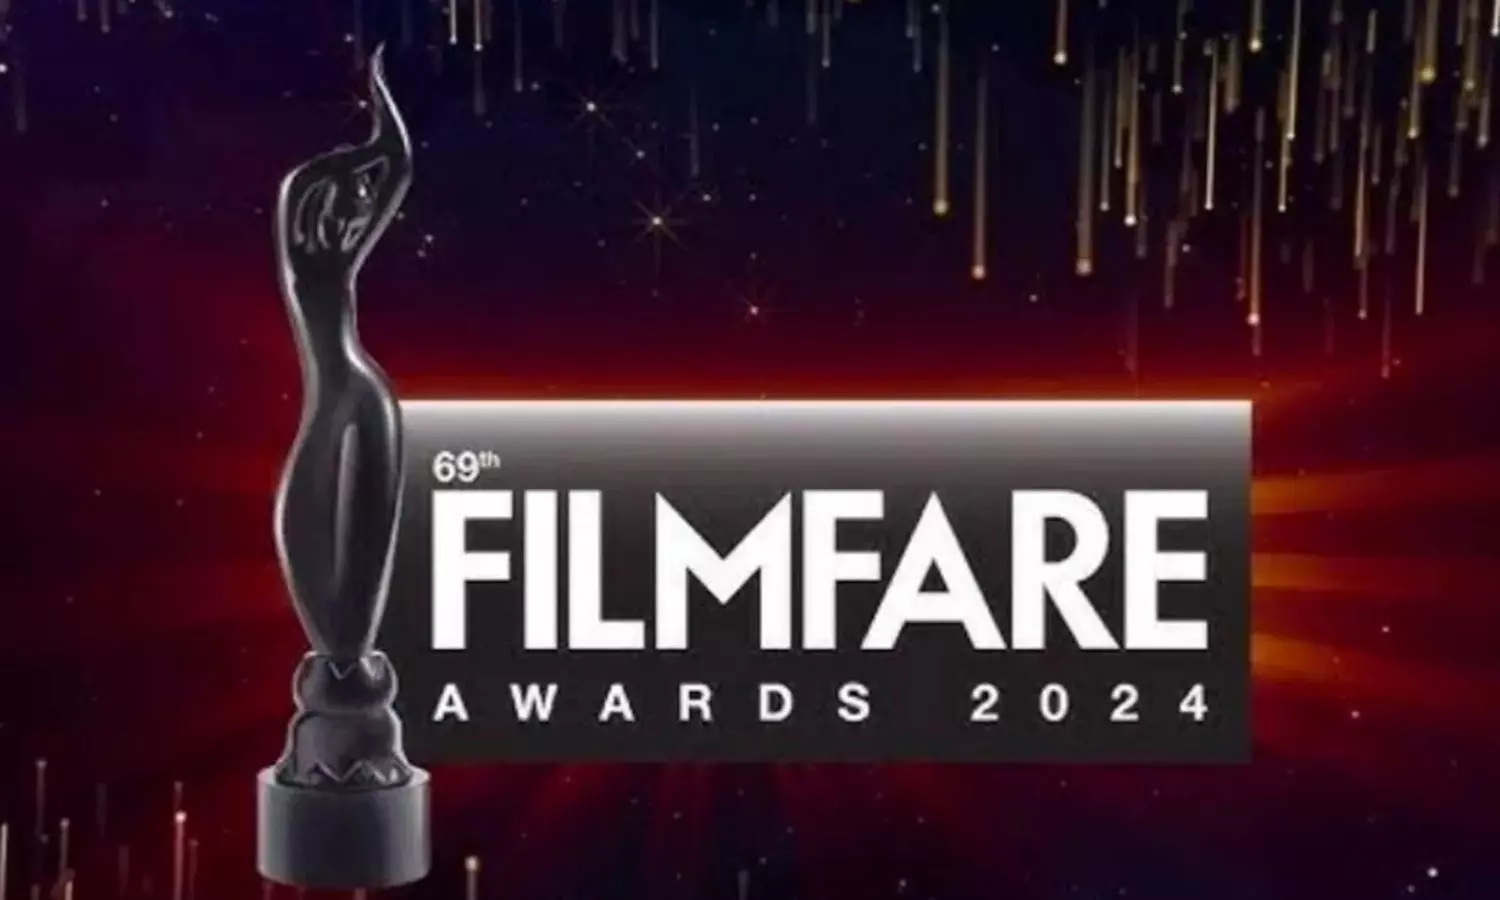 These blockbuster films made it to the 69th Filmfare Awards 2024, see